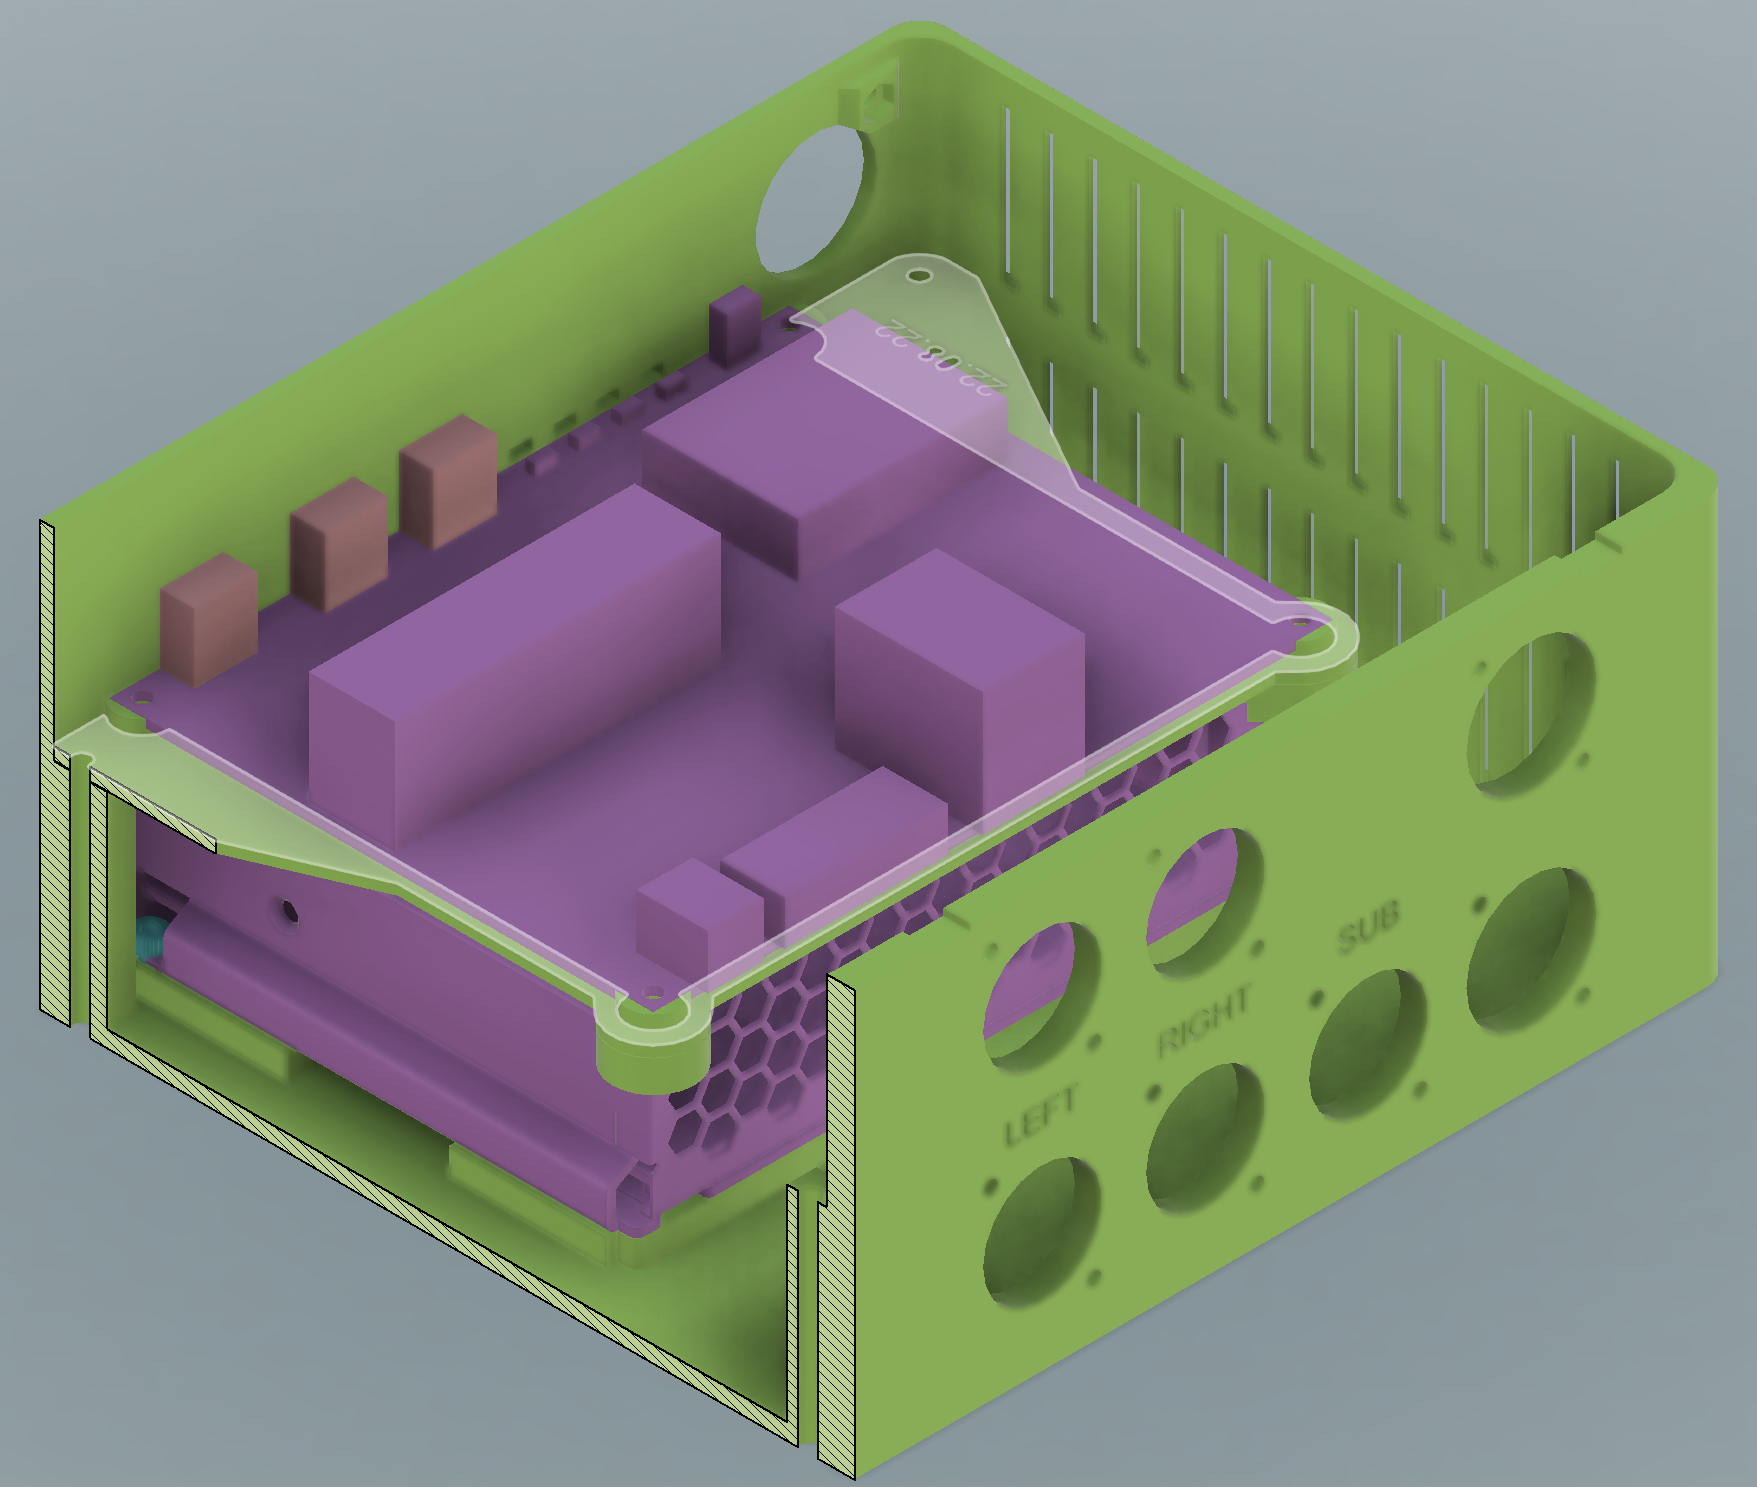 Viewed from the rear corner, the PCB (purple) sits on top of a midplate (green, highlighted) which sits on top of the power supply (also purple, bottom).